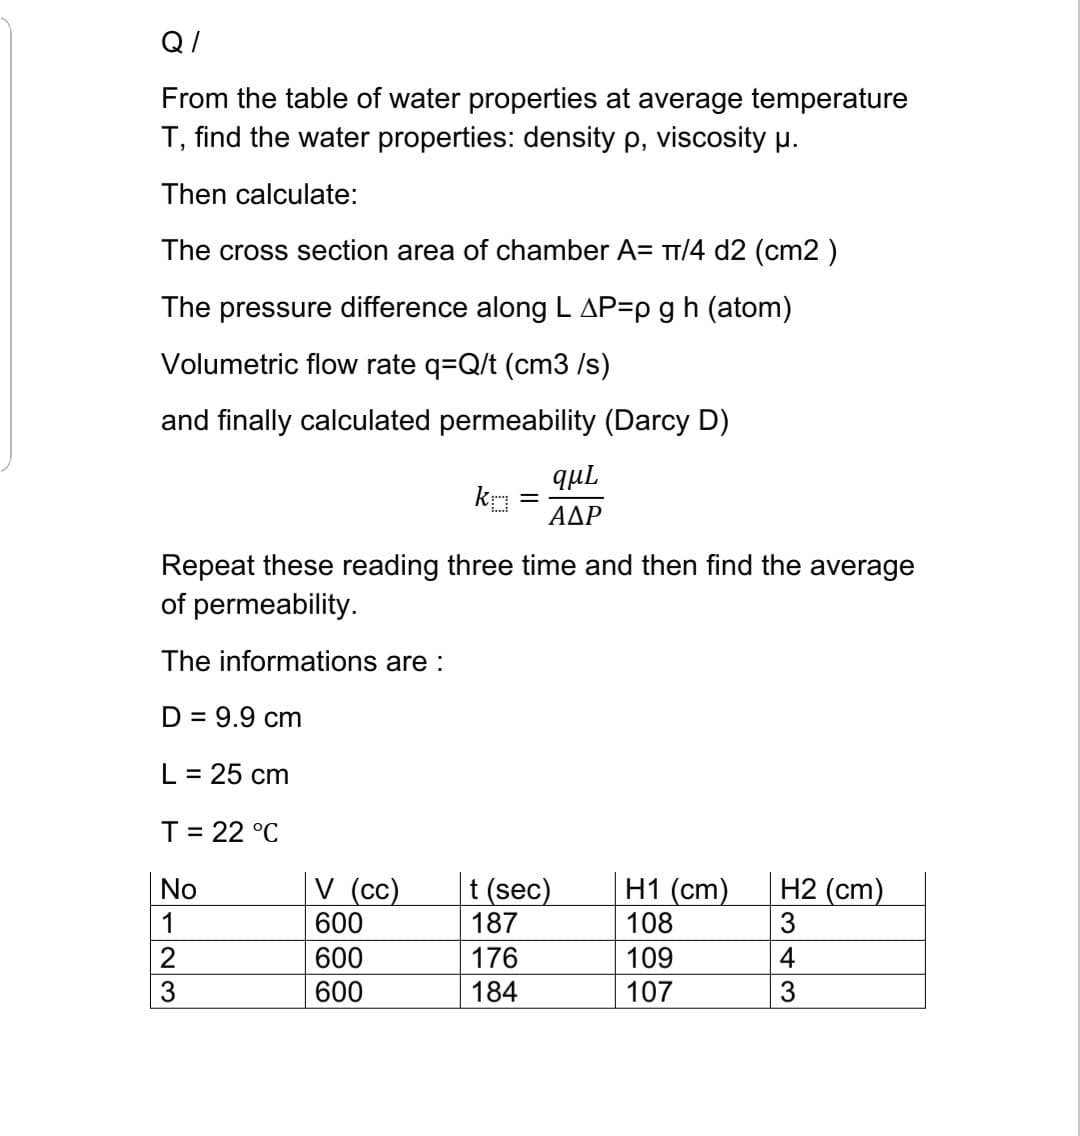 Q/
From the table of water properties at average temperature
T, find the water properties: density p, viscosity µ.
Then calculate:
The cross section area of chamber A= T/4 d2 (cm2 )
The pressure difference along L AP=p g h (atom)
Volumetric flow rate q=Q/t (cm3 /s)
and finally calculated permeability (Darcy D)
qul
ΑΔΡ
Repeat these reading three time and then find the average
of permeability.
The informations are :
D = 9.9 cm
L = 25 cm
T= 22 °C
V (cc)
600
t (sec)
187
H1 (cm)
108
3
H2 (cm)
No
1
2
600
176
109
4
3
600
184
107
3
